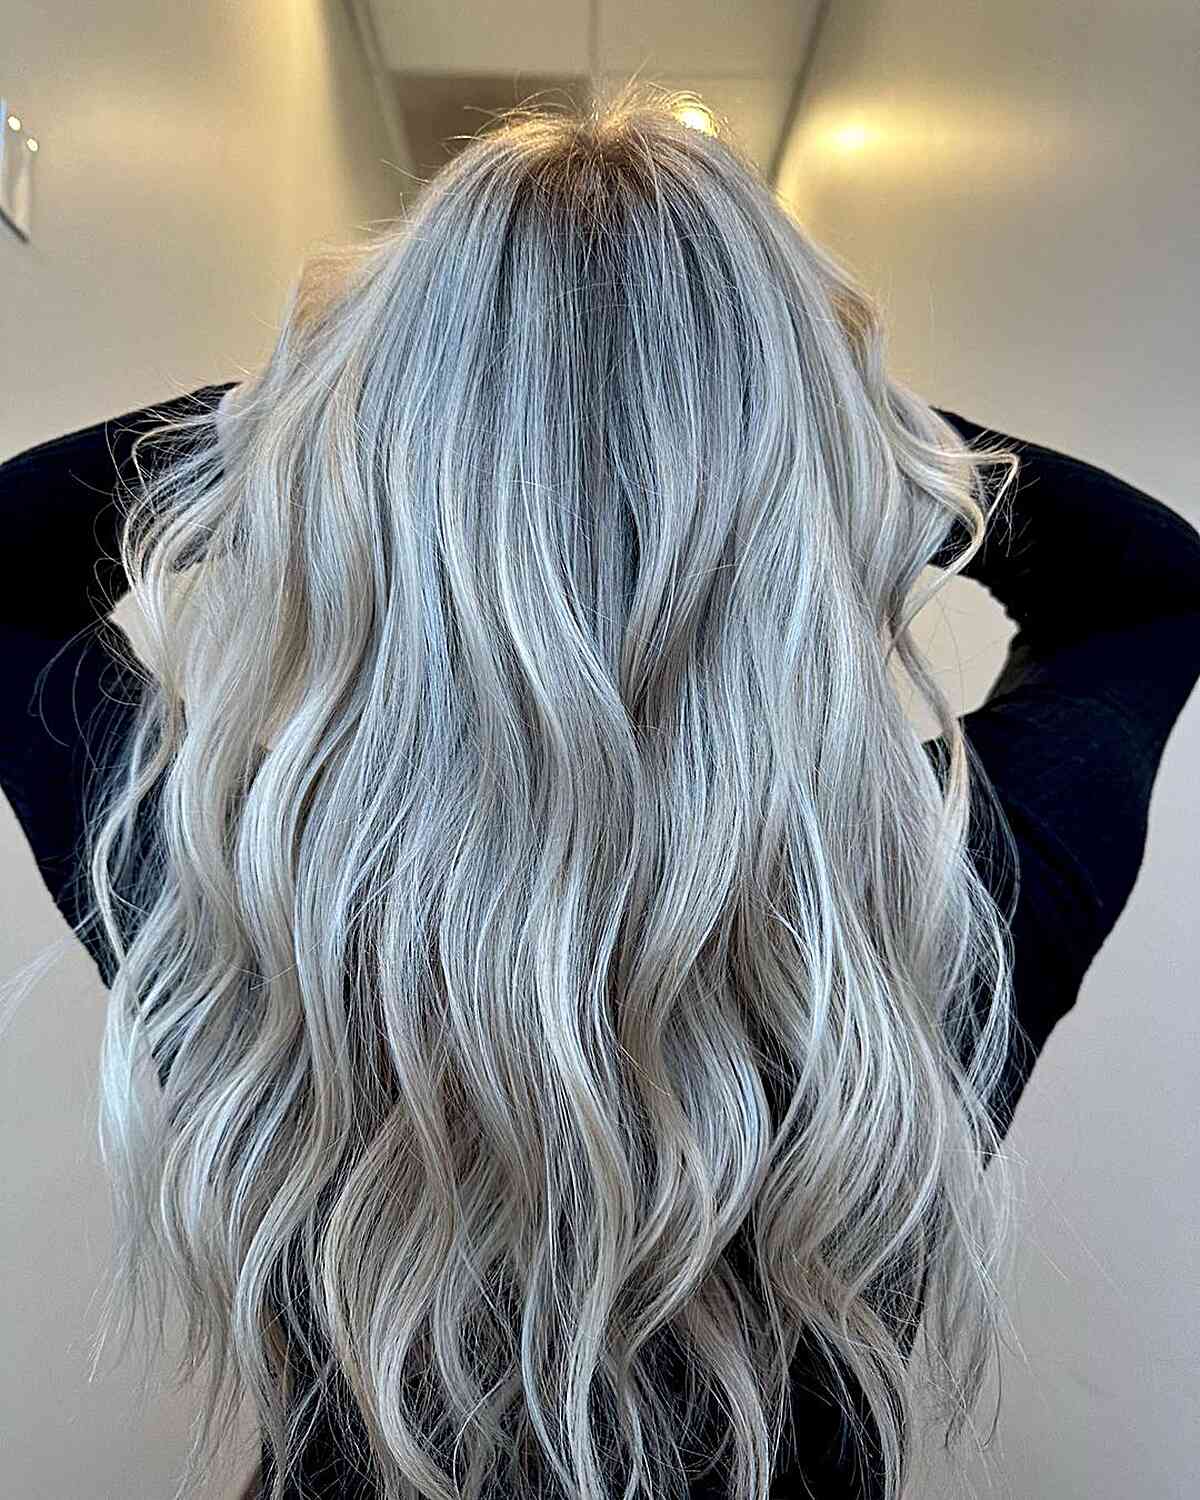 25 Icy Blonde Balayage Ideas for a Stunning Blonde Makeover